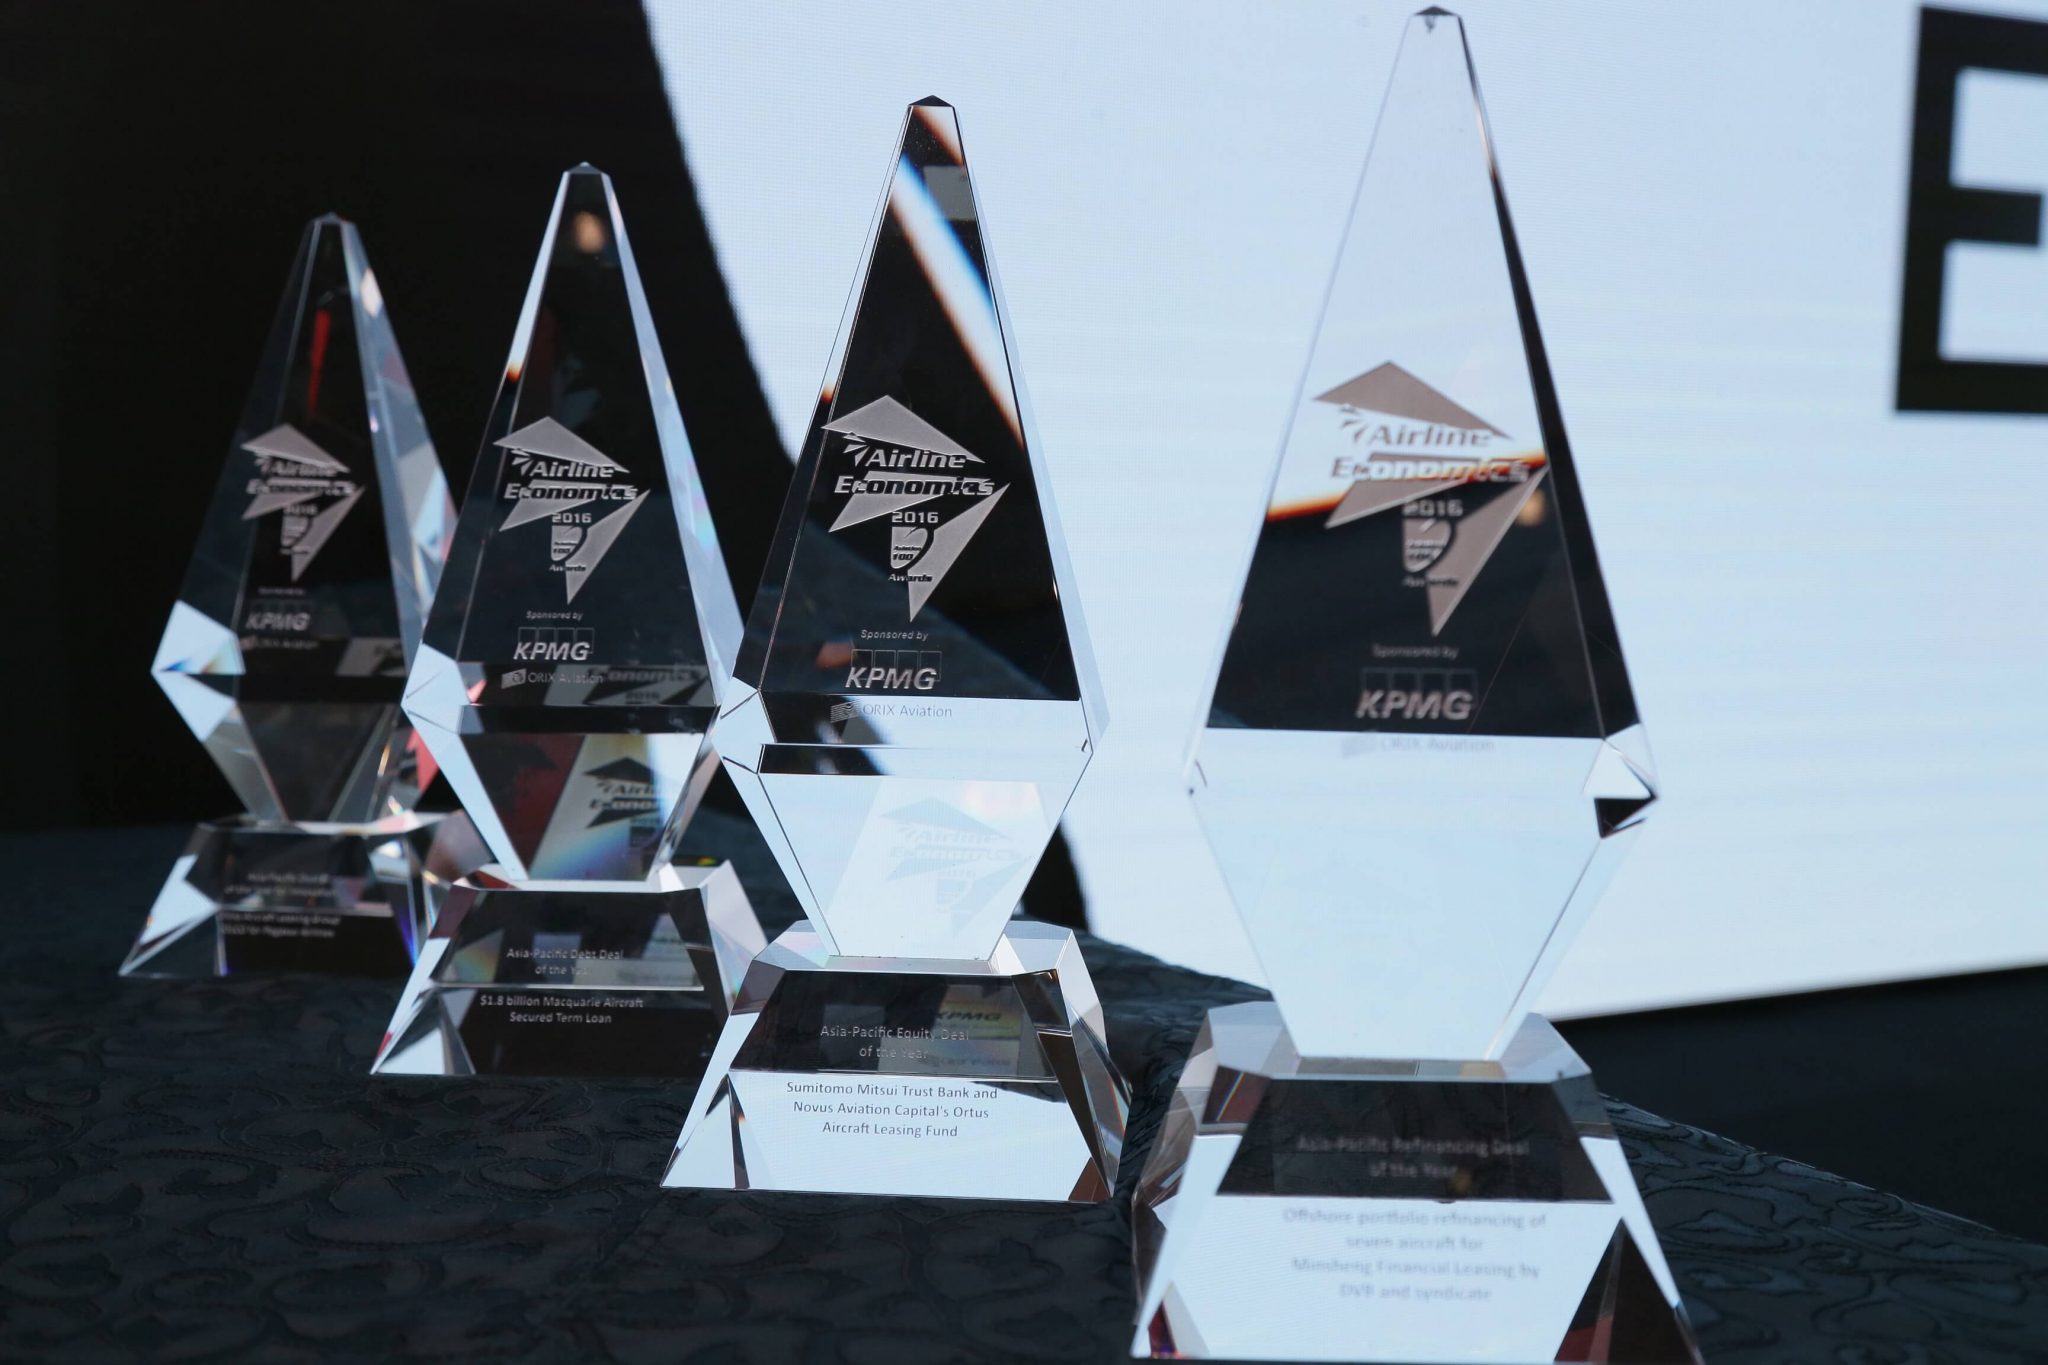 VOTING CONTINUES FOR THE AMERICAS AND ASIA-PACIFIC AVIATION 100 AWARDS